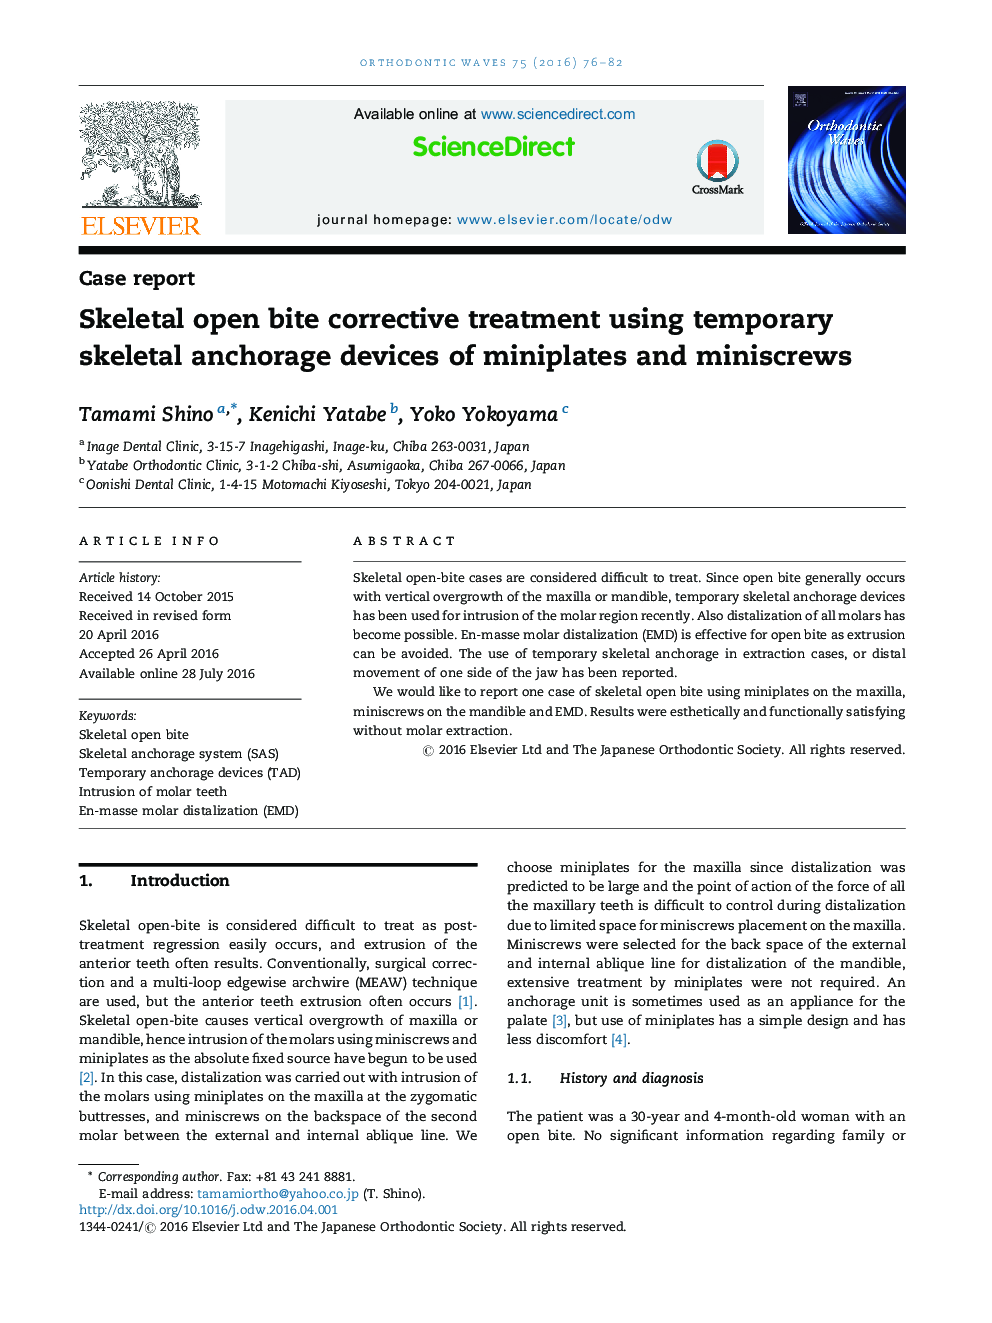 Skeletal open bite corrective treatment using temporary skeletal anchorage devices of miniplates and miniscrews